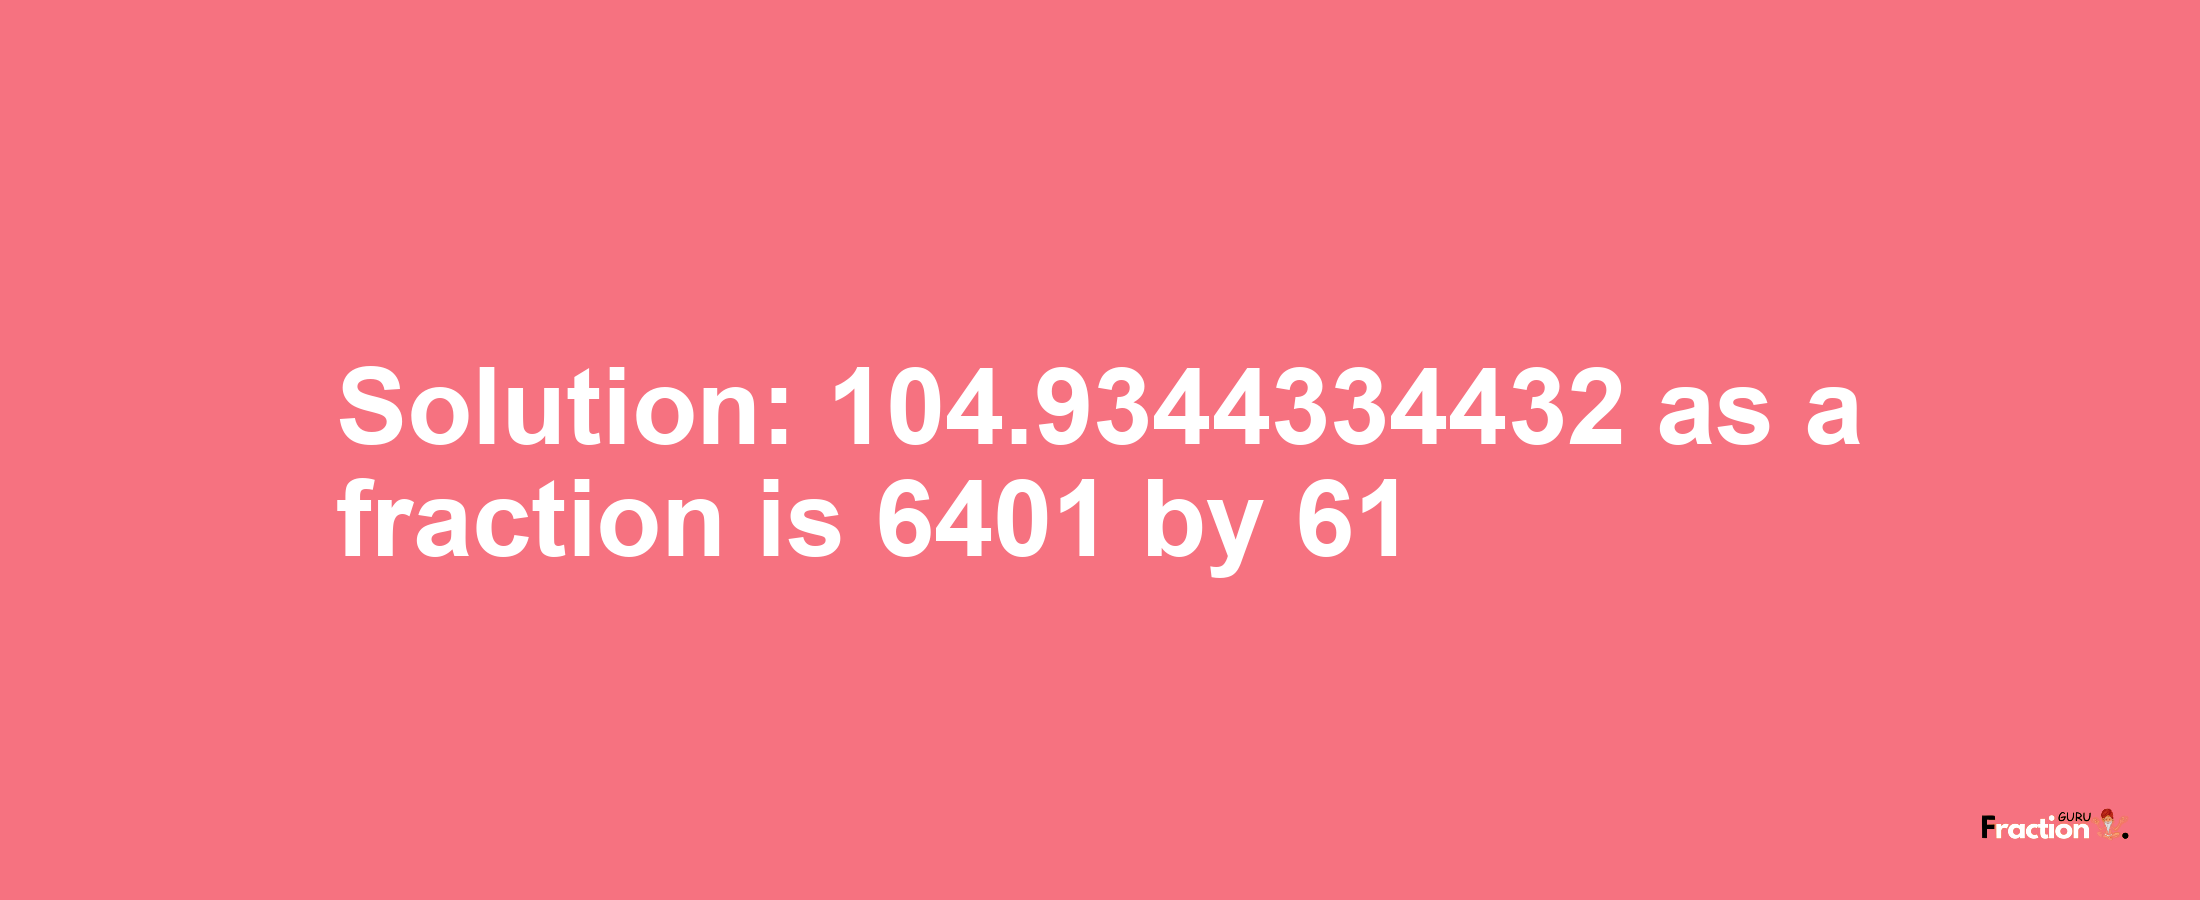 Solution:104.9344334432 as a fraction is 6401/61